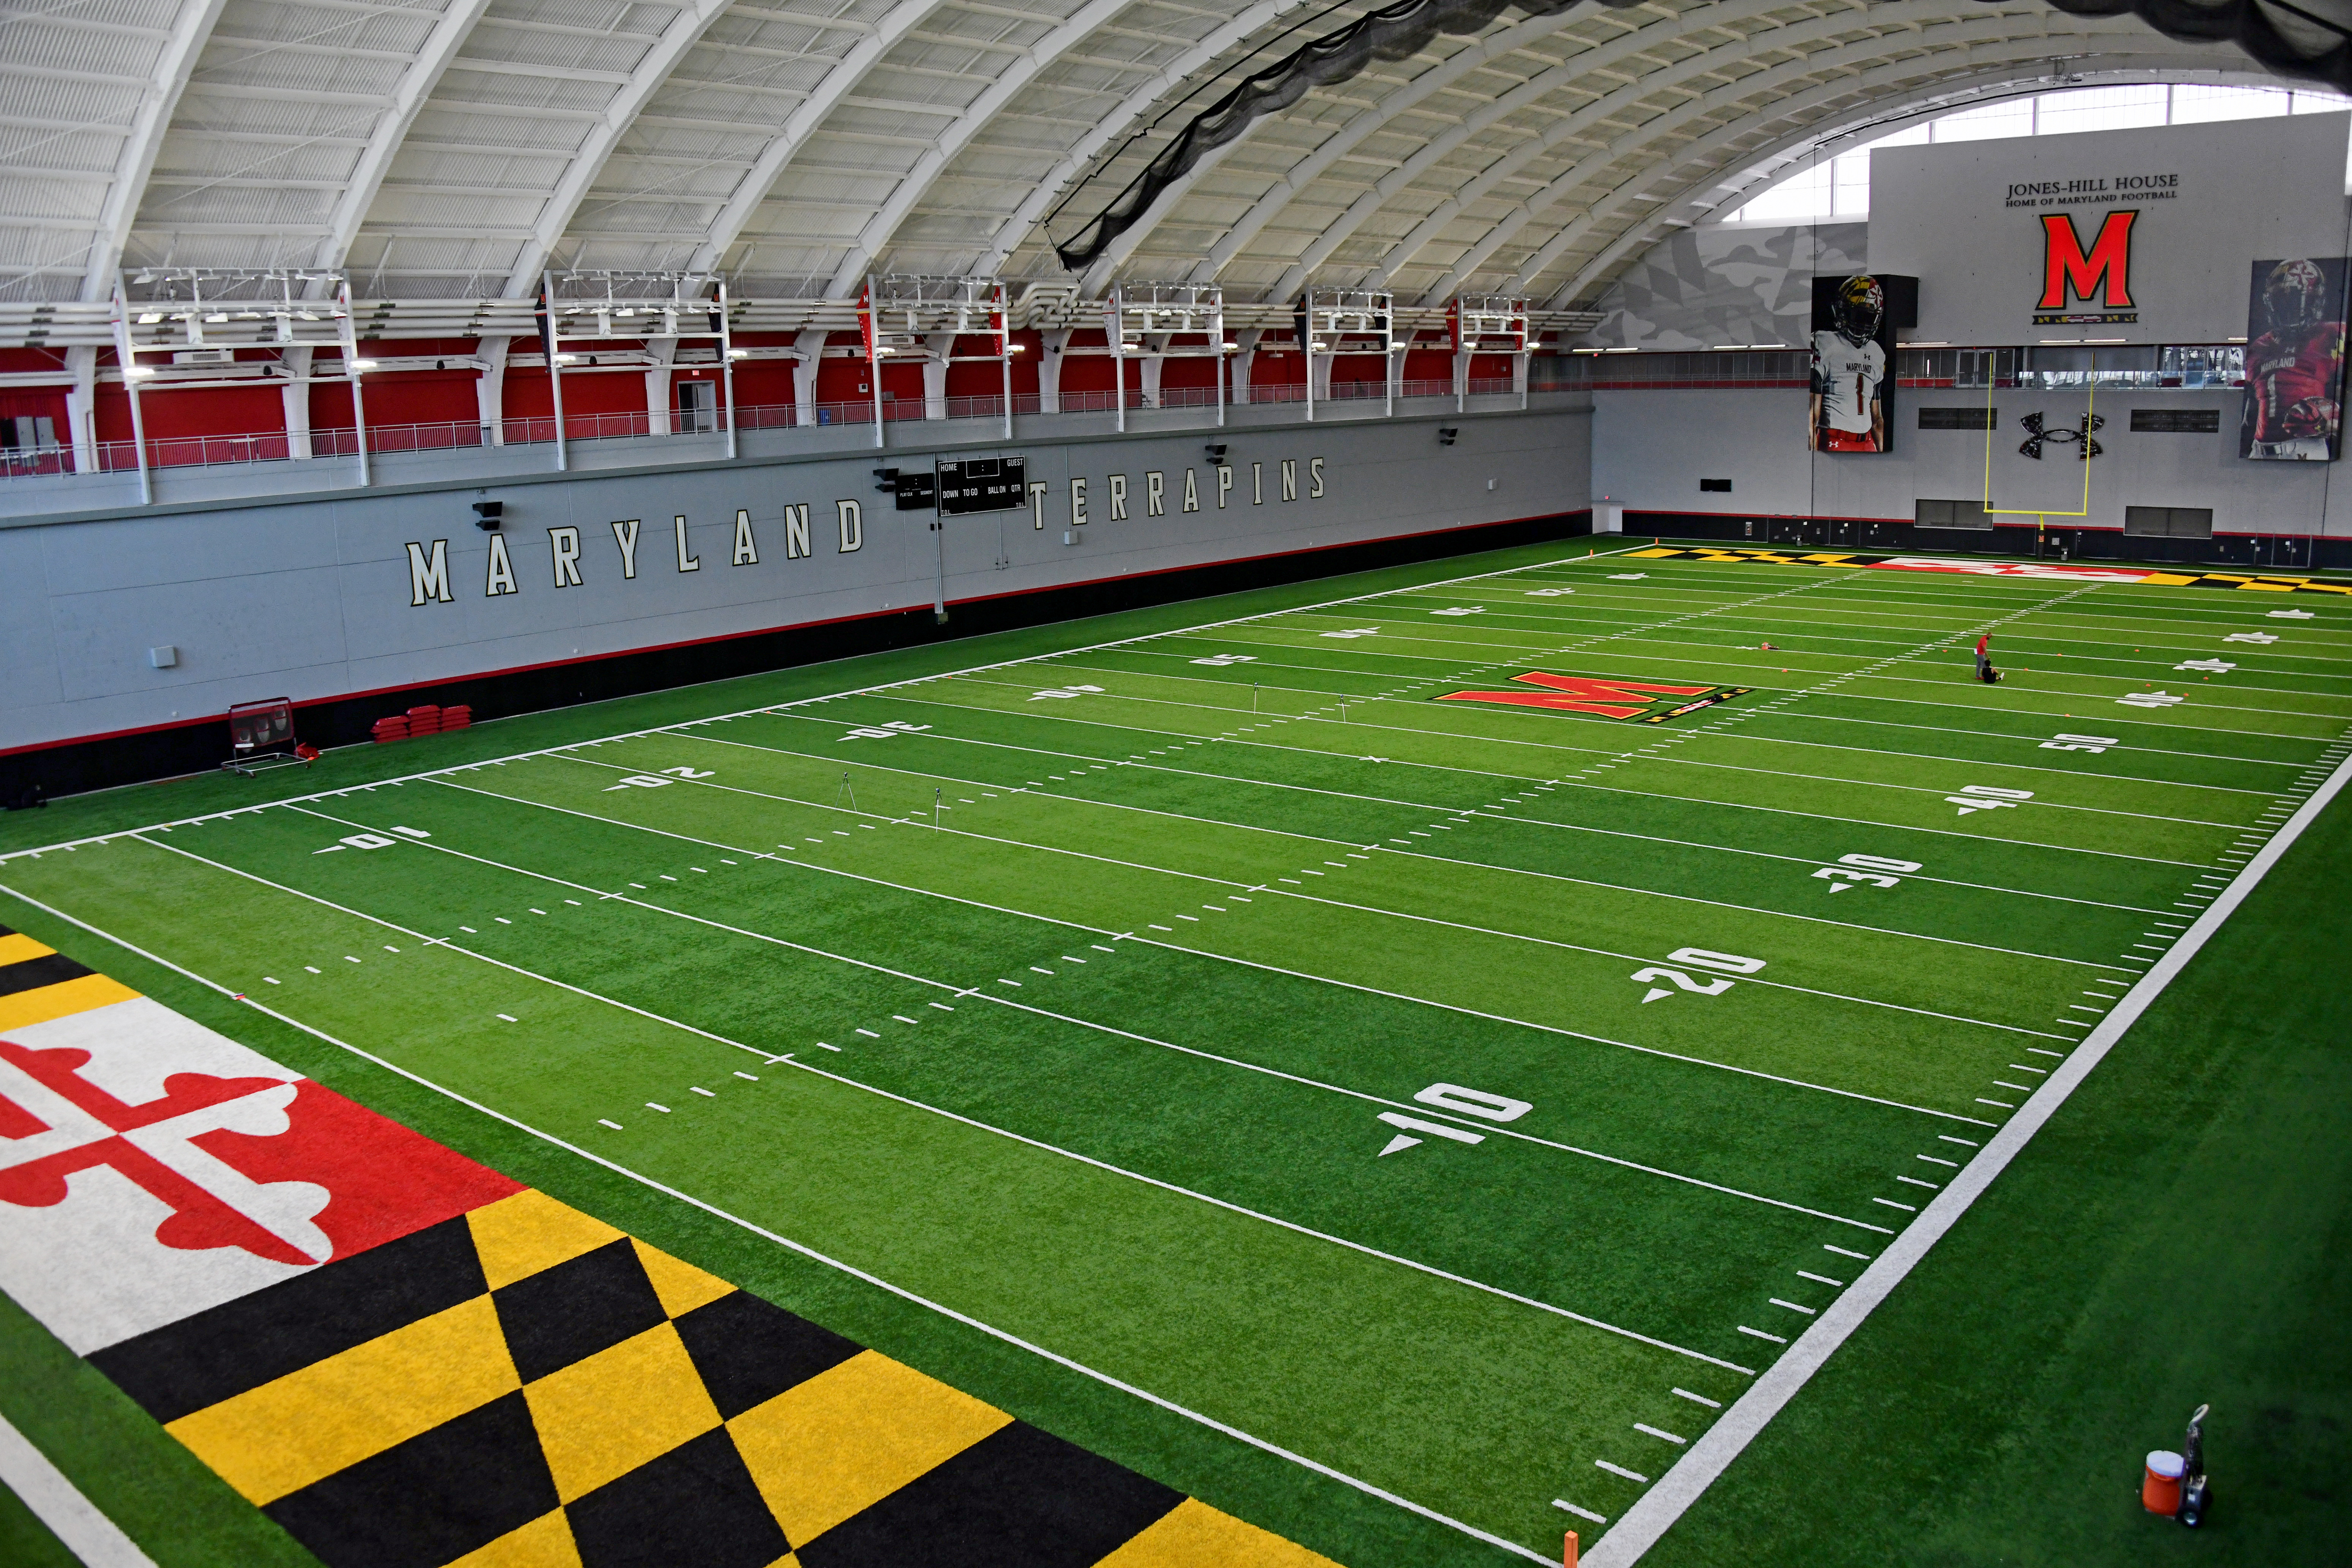 University of Maryland unveiling new high-tech football field in